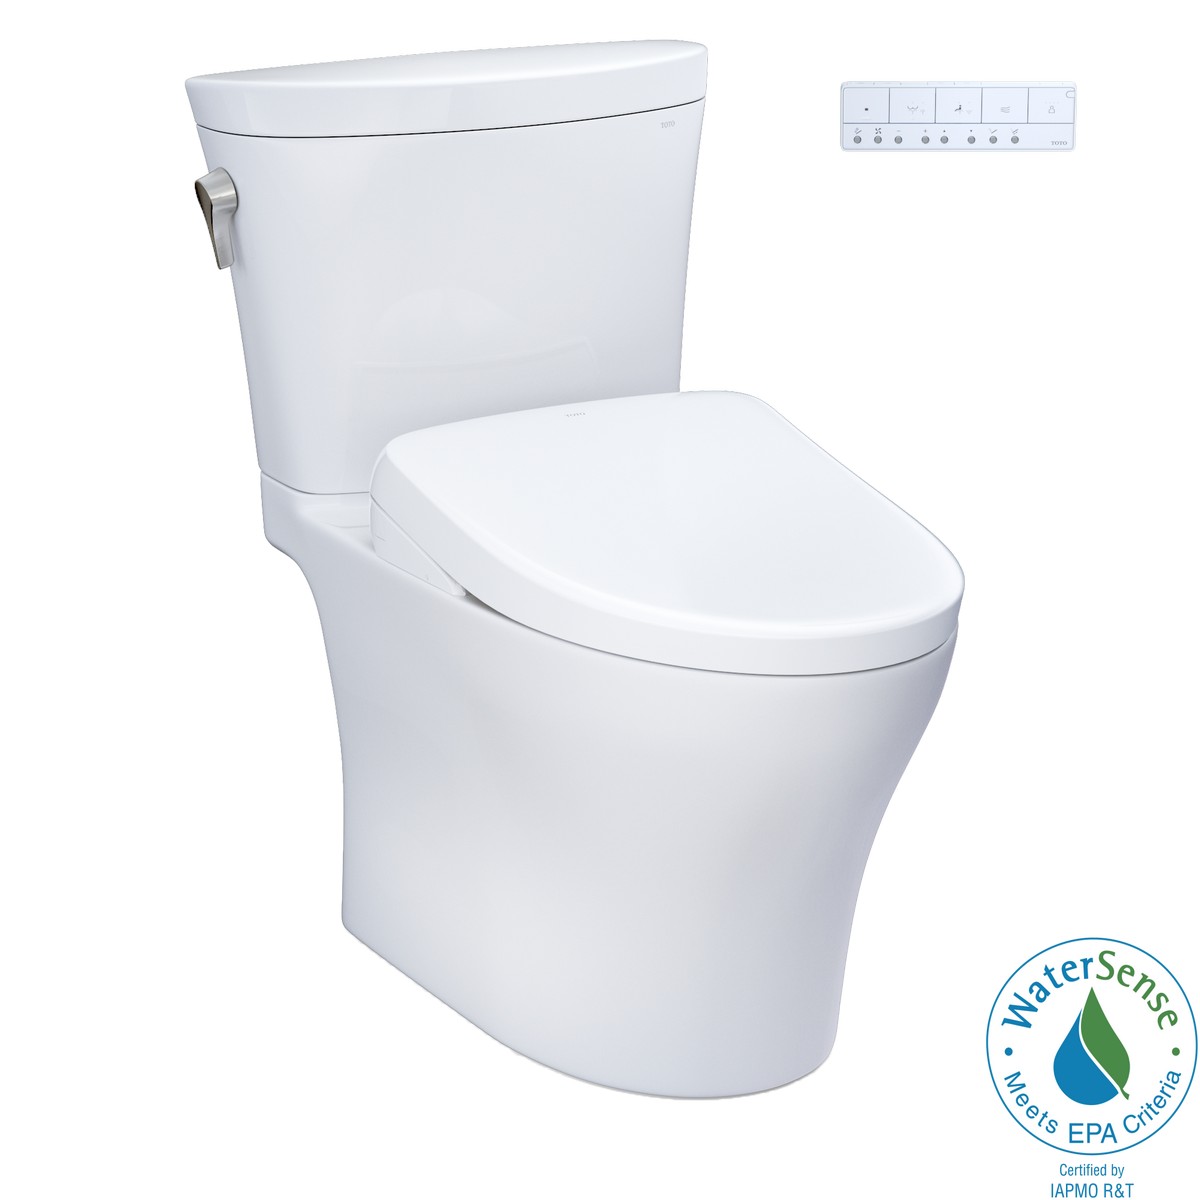 TOTO MW4484736CEMFG#01 WASHLET+ AQUIA IV ARC 1.28 AND 0.9 GPF TWO PIECE DUAL FLUSH ELONGATED TOILET WITH WASHLET S7A BIDET SEAT IN COTTON WHITE